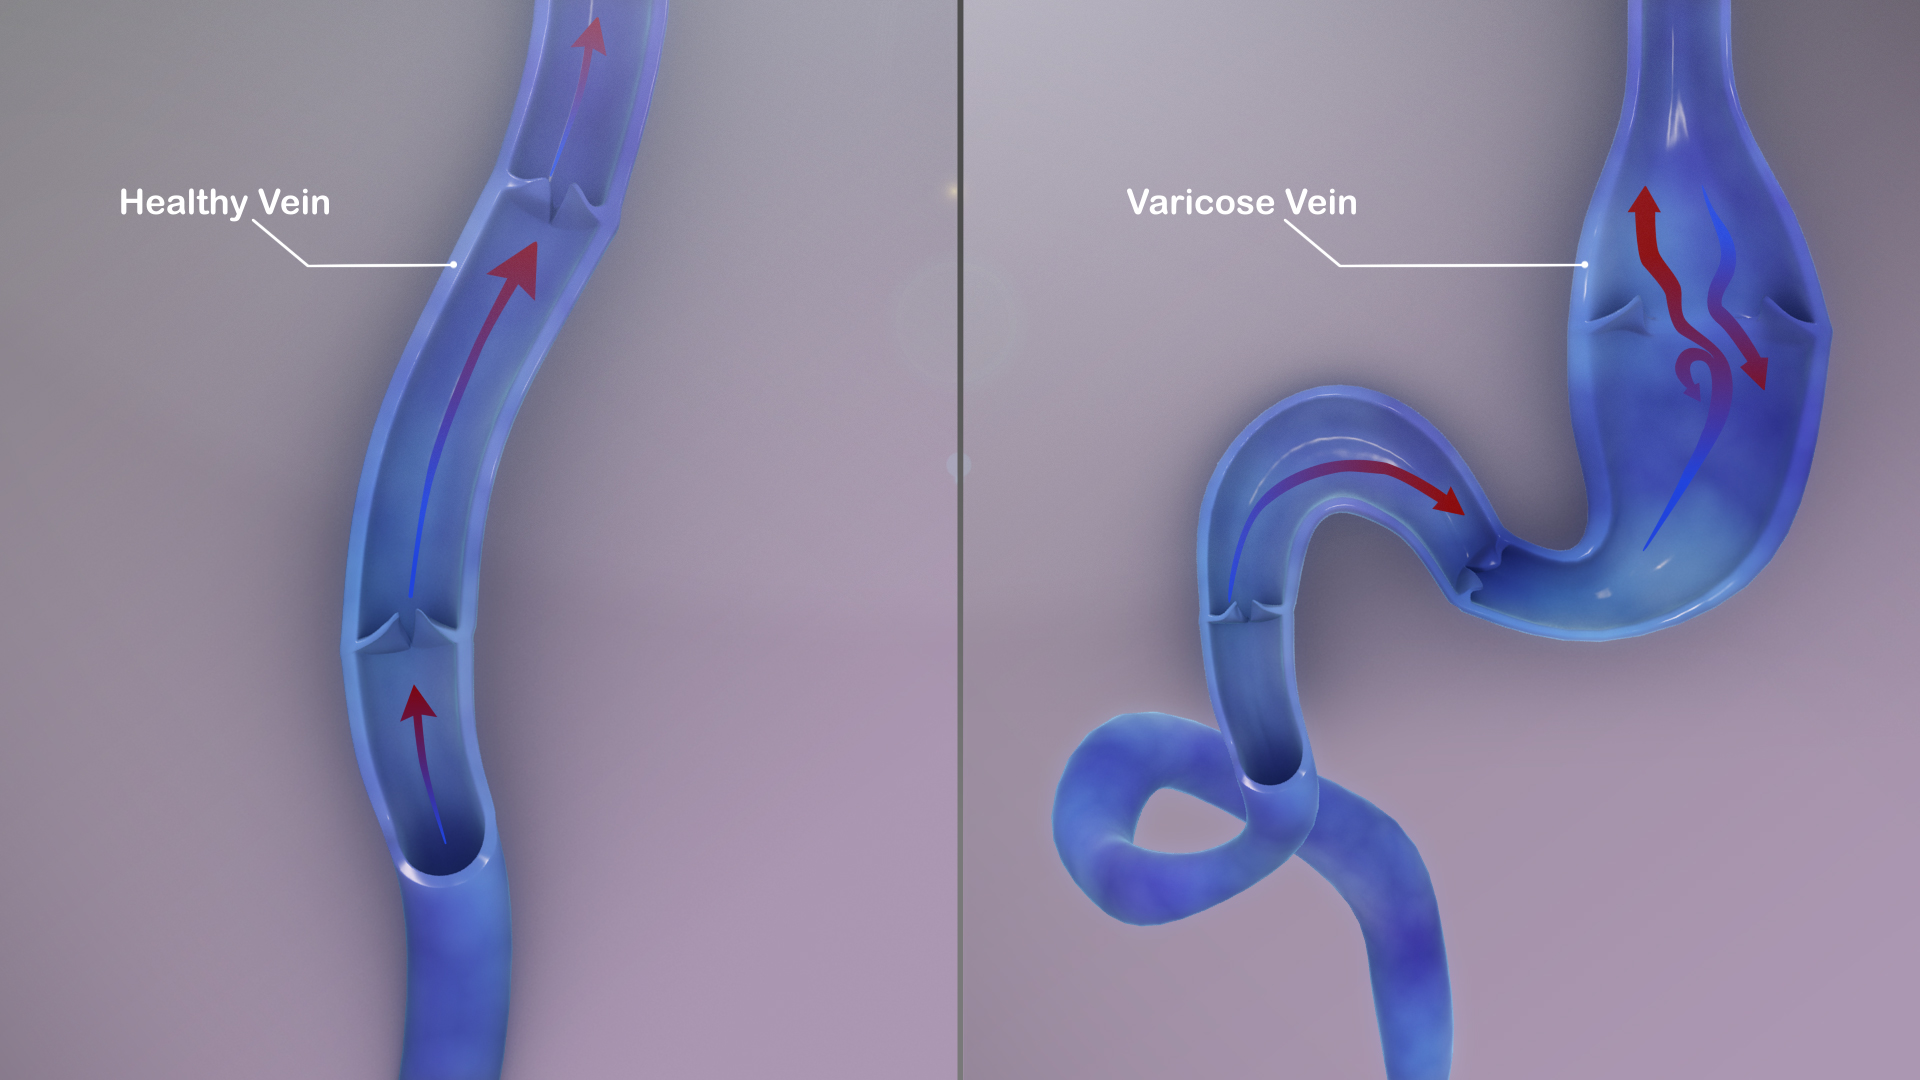 Varicose veins: Symptoms, Causes, and Treatment - Scientific Animations.